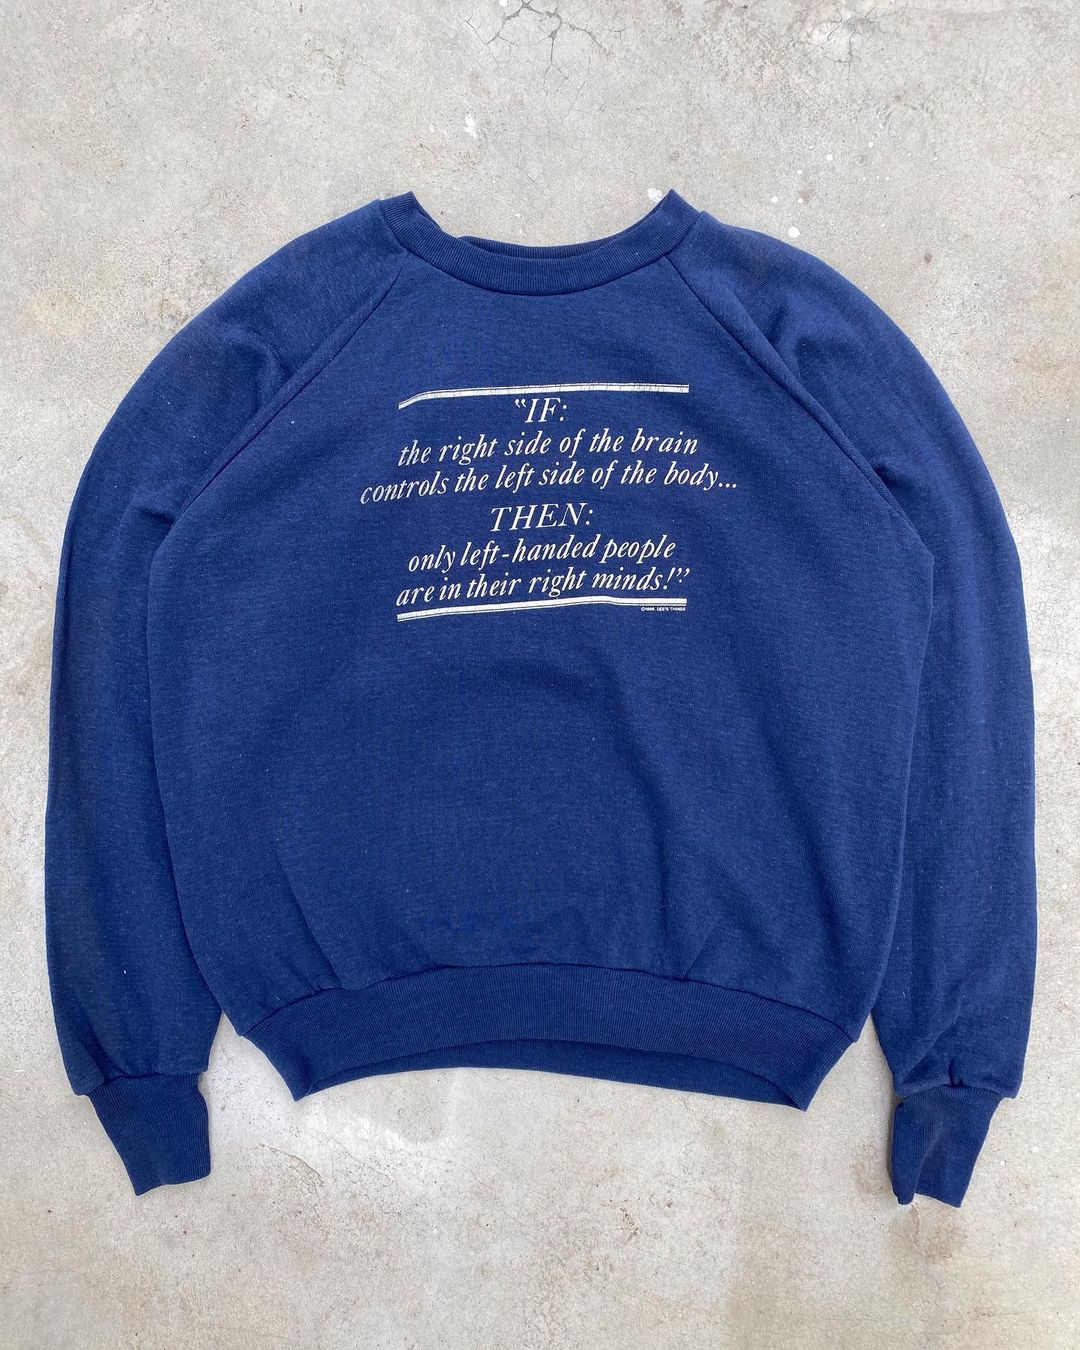 1986 “Left Handers are the only People in their Right Mind” Raglan Sweatshirt